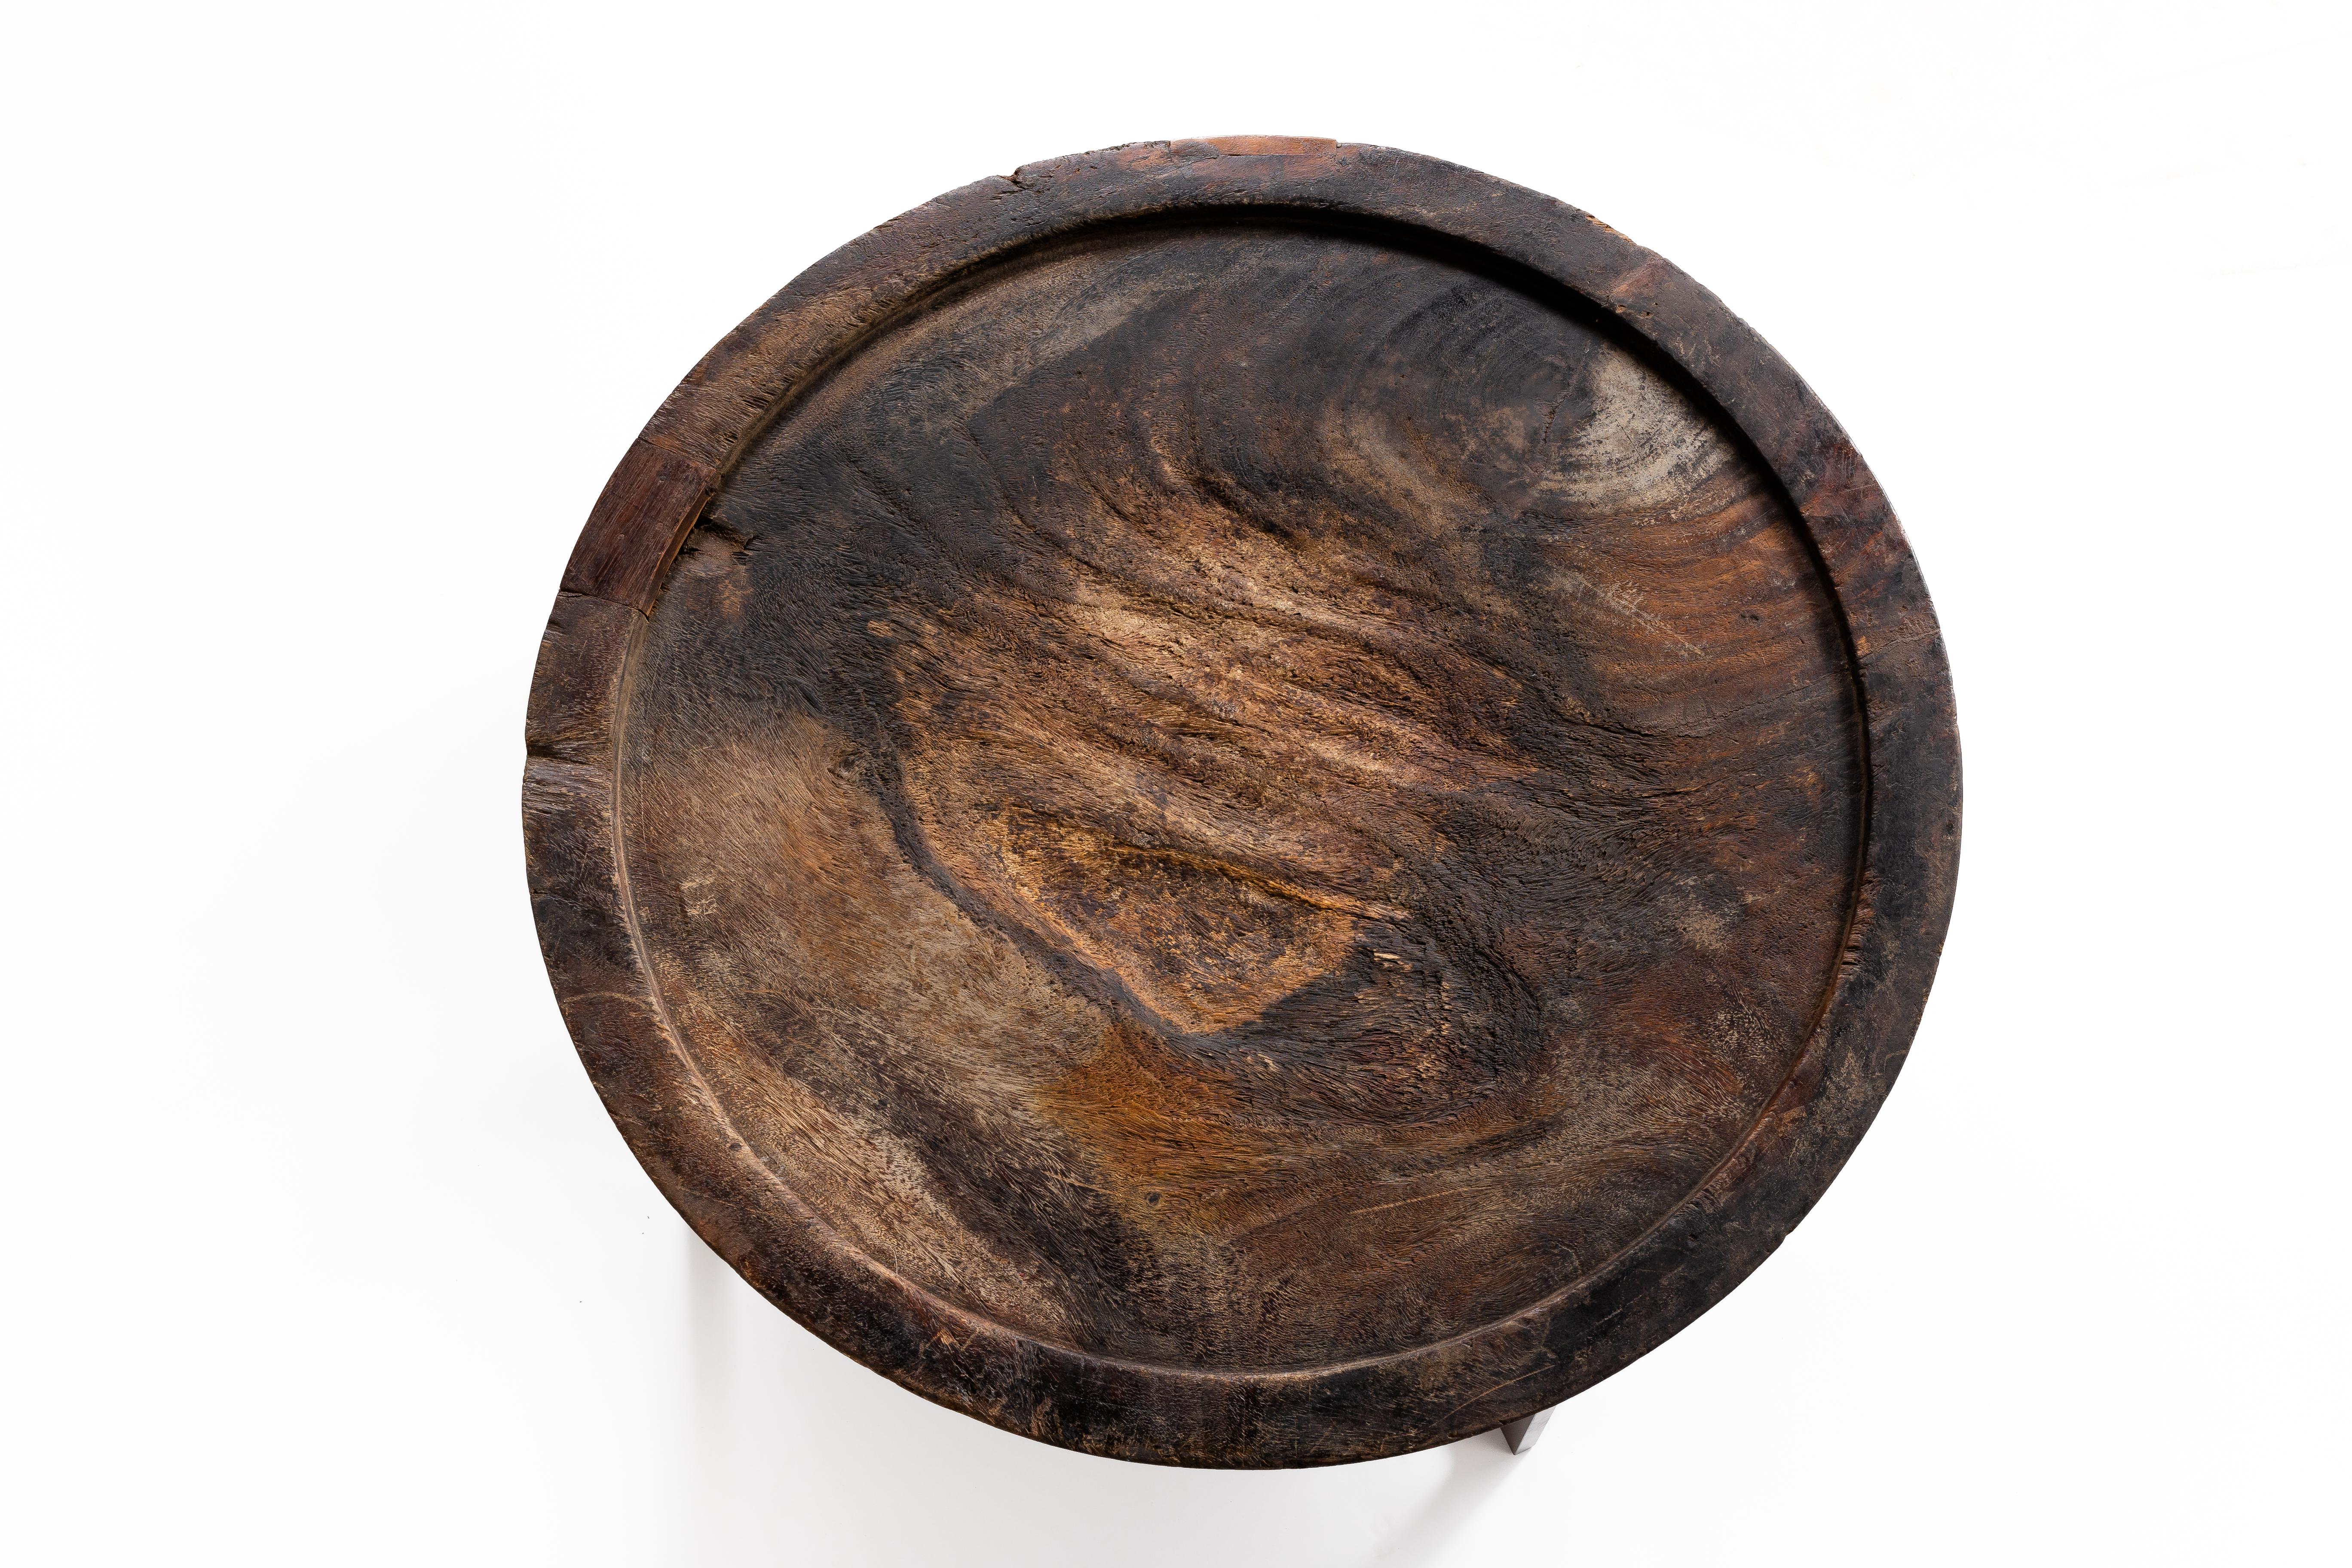 Patinated Vintage Teak South Asian Serving Bowl on Patinaed Steel Stand